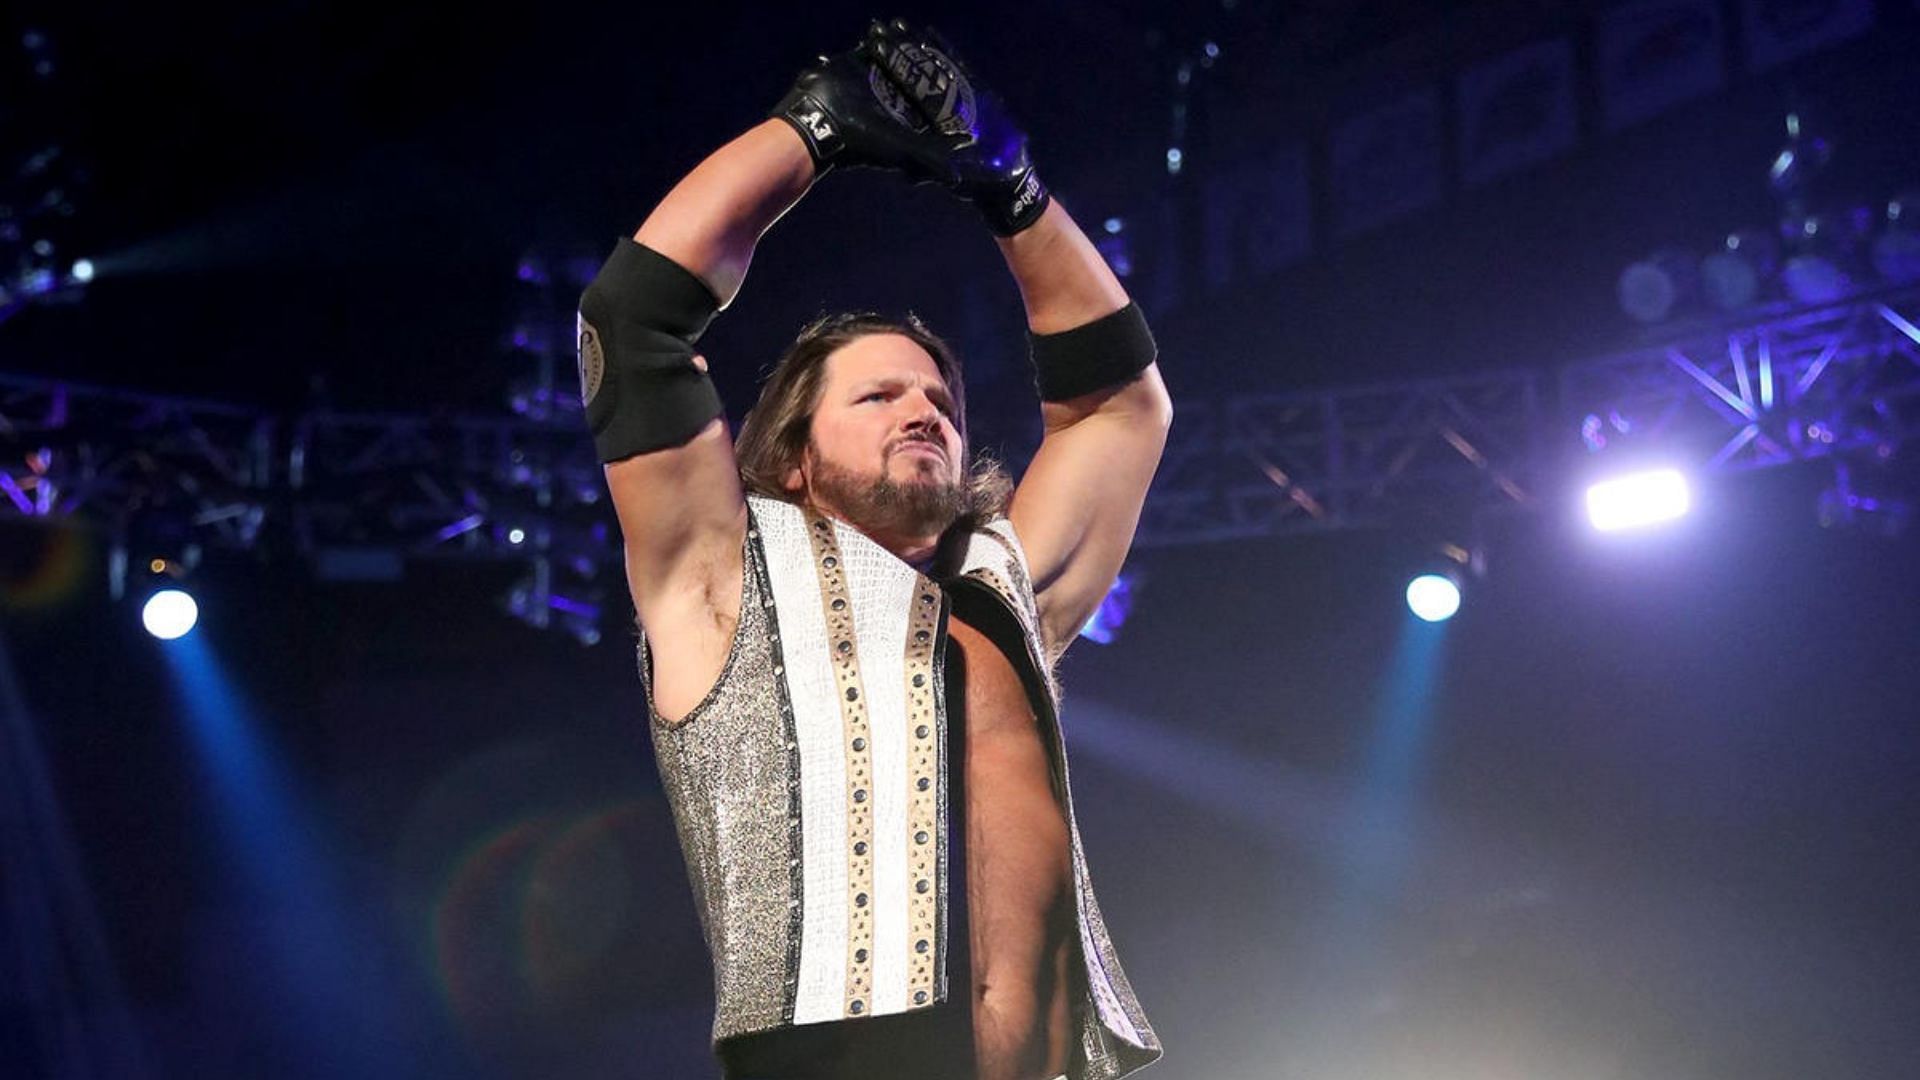 AJ Styles is one of the best in the business